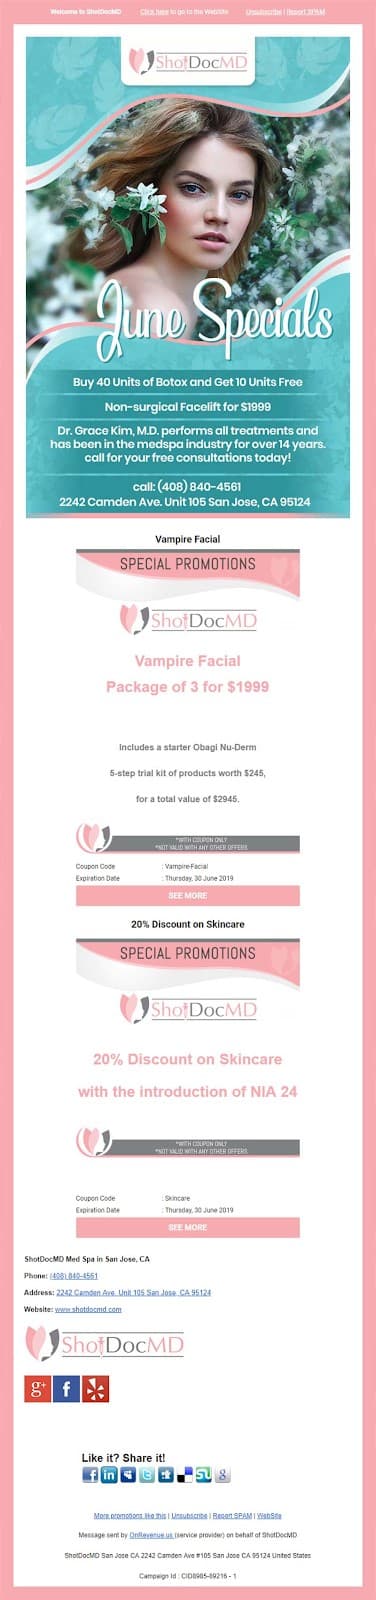 Email newsletter by ShoDocMD